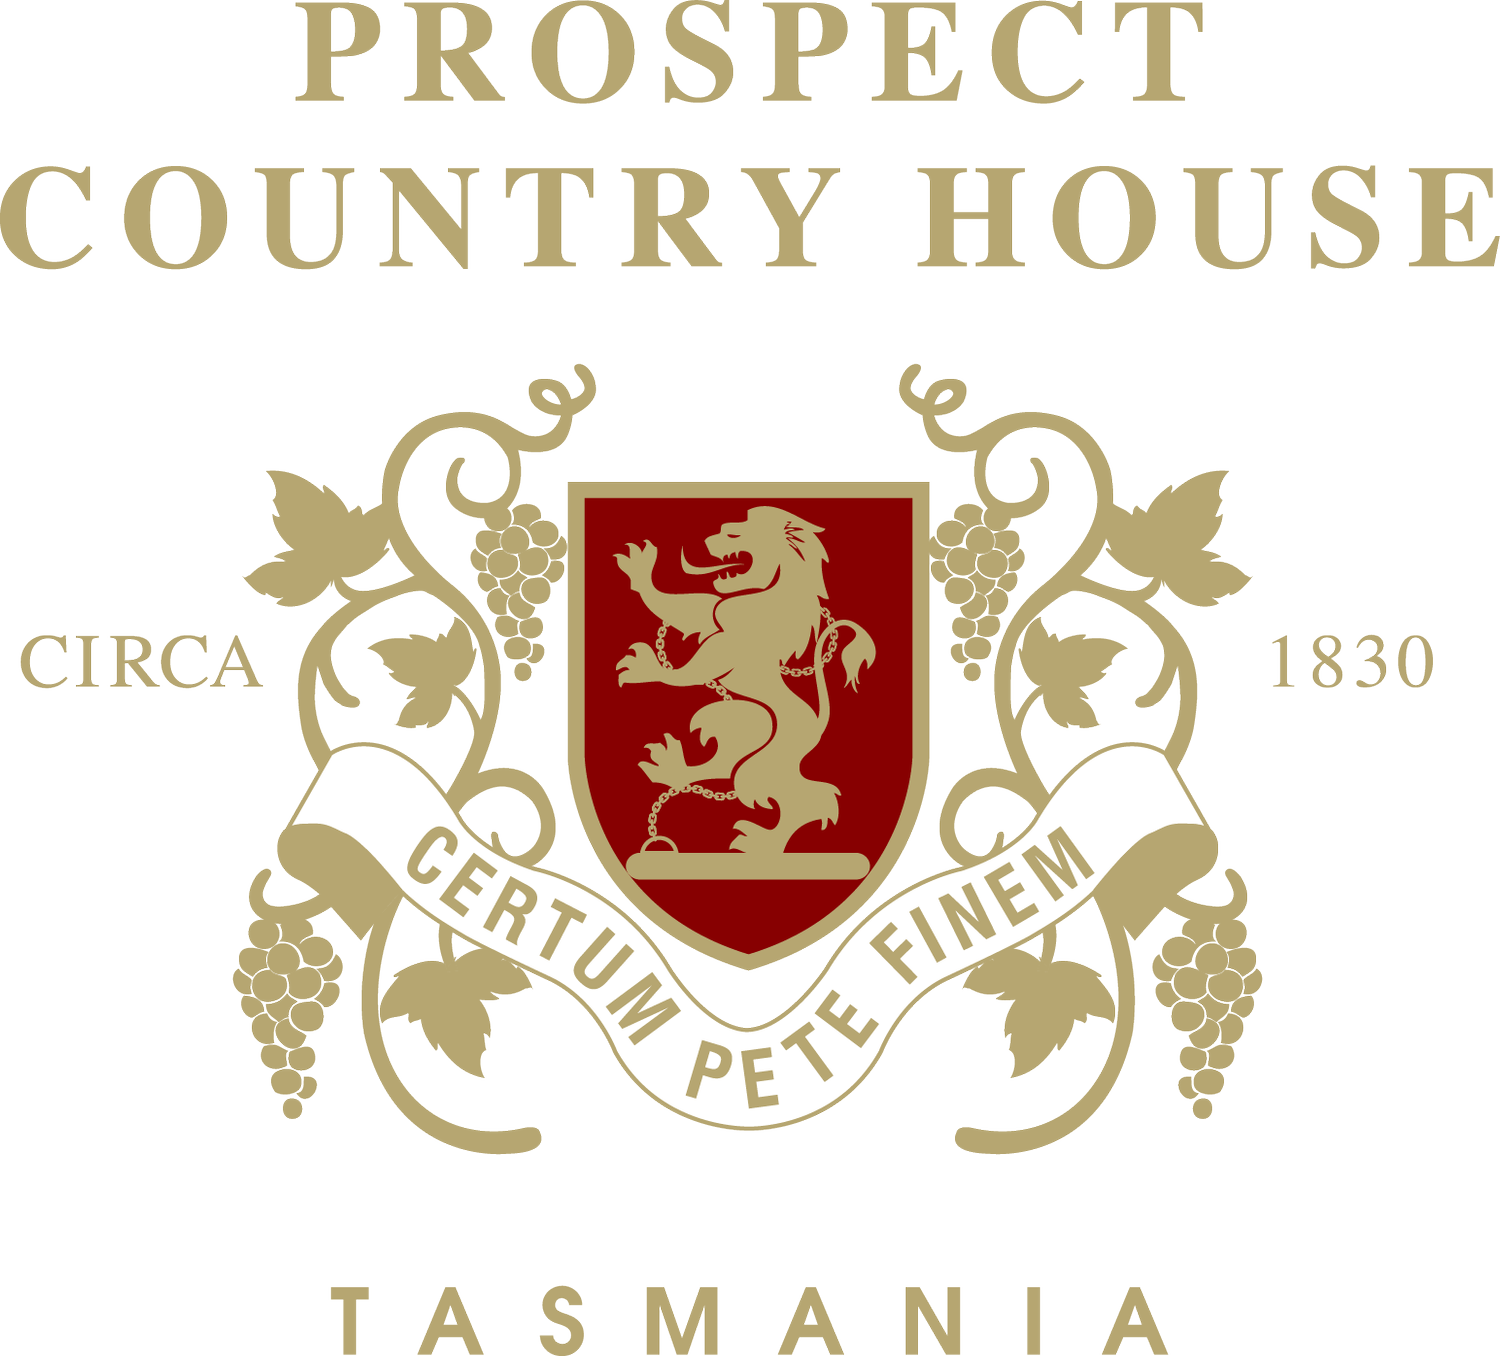 Prospect Country House